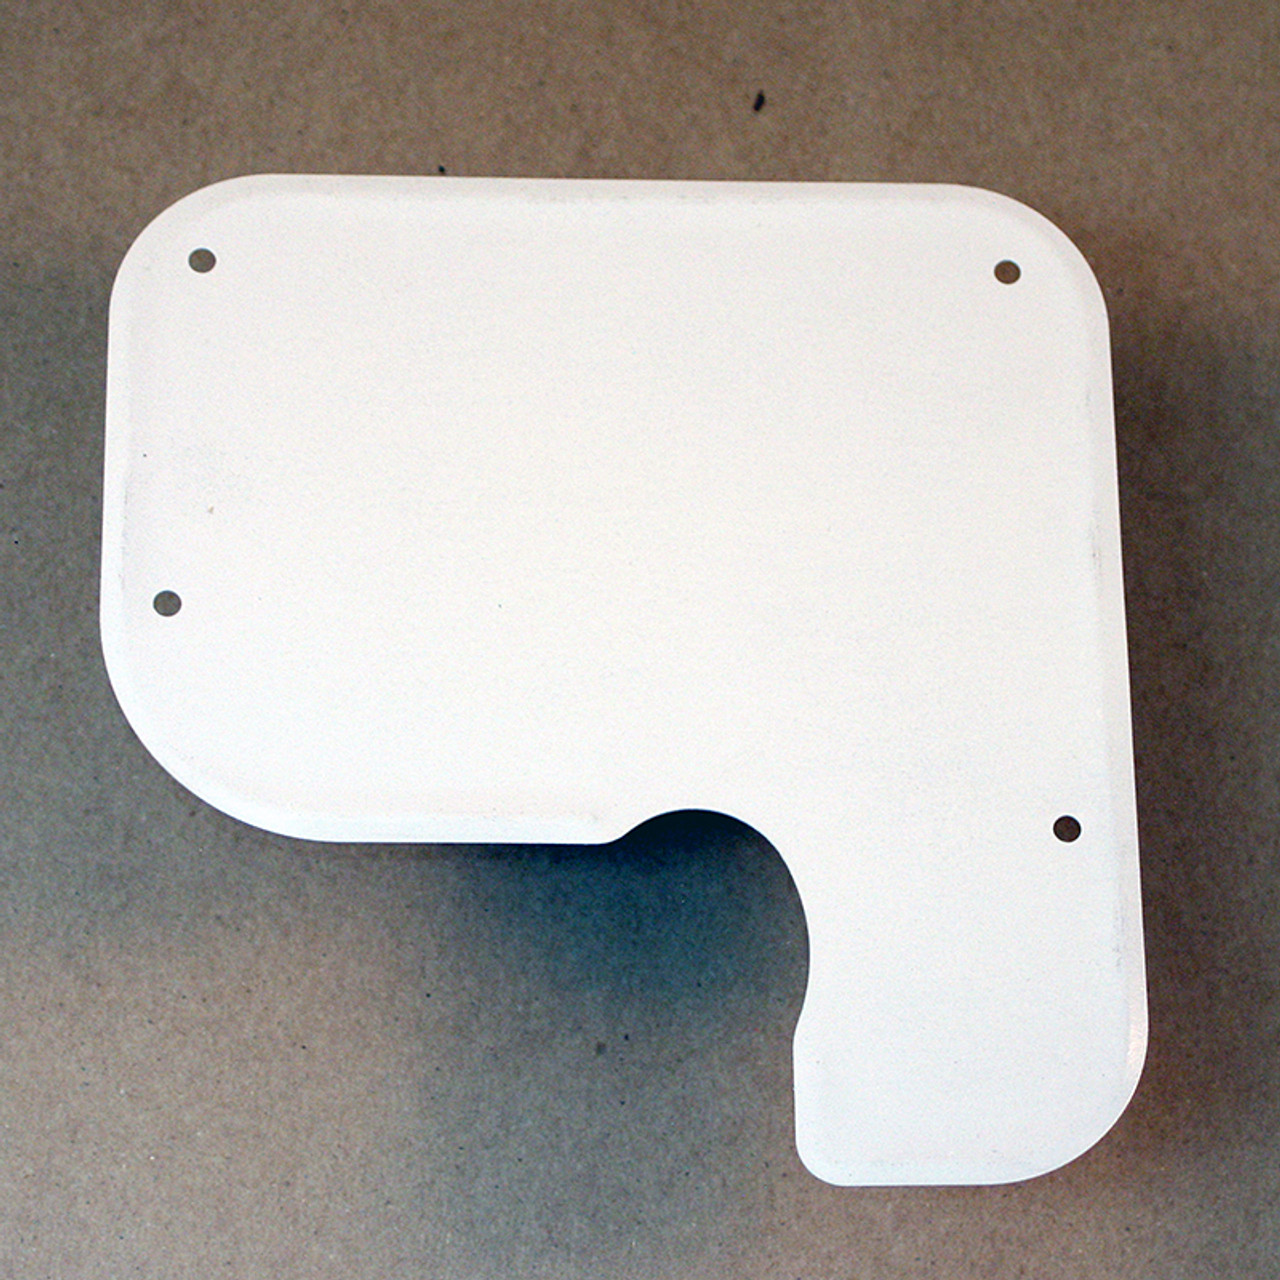 U64835-000   UNIVAIR TAIL INSPECTION PLATE - LEFT - FITS PIPER